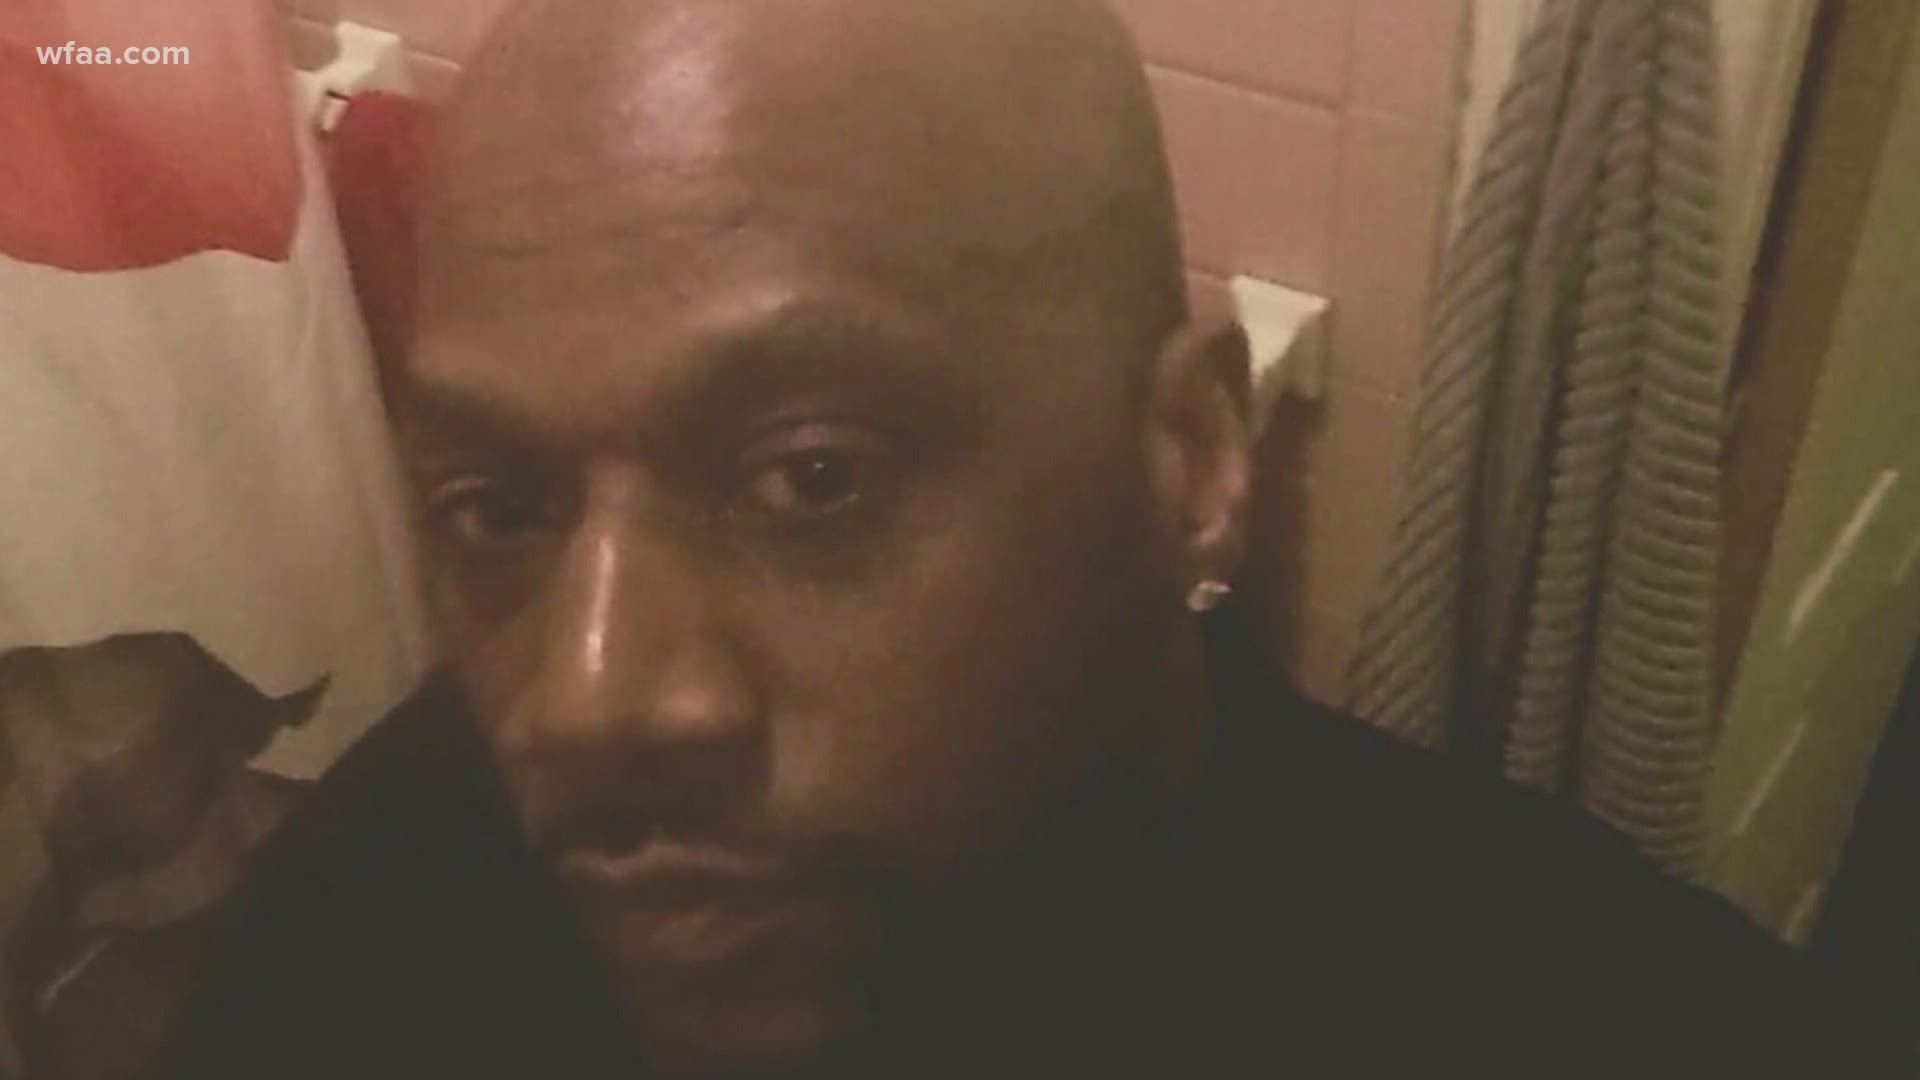 Prude, 41, died from asphyxiation after New York police officers used a "spit hood" on him to detain him.